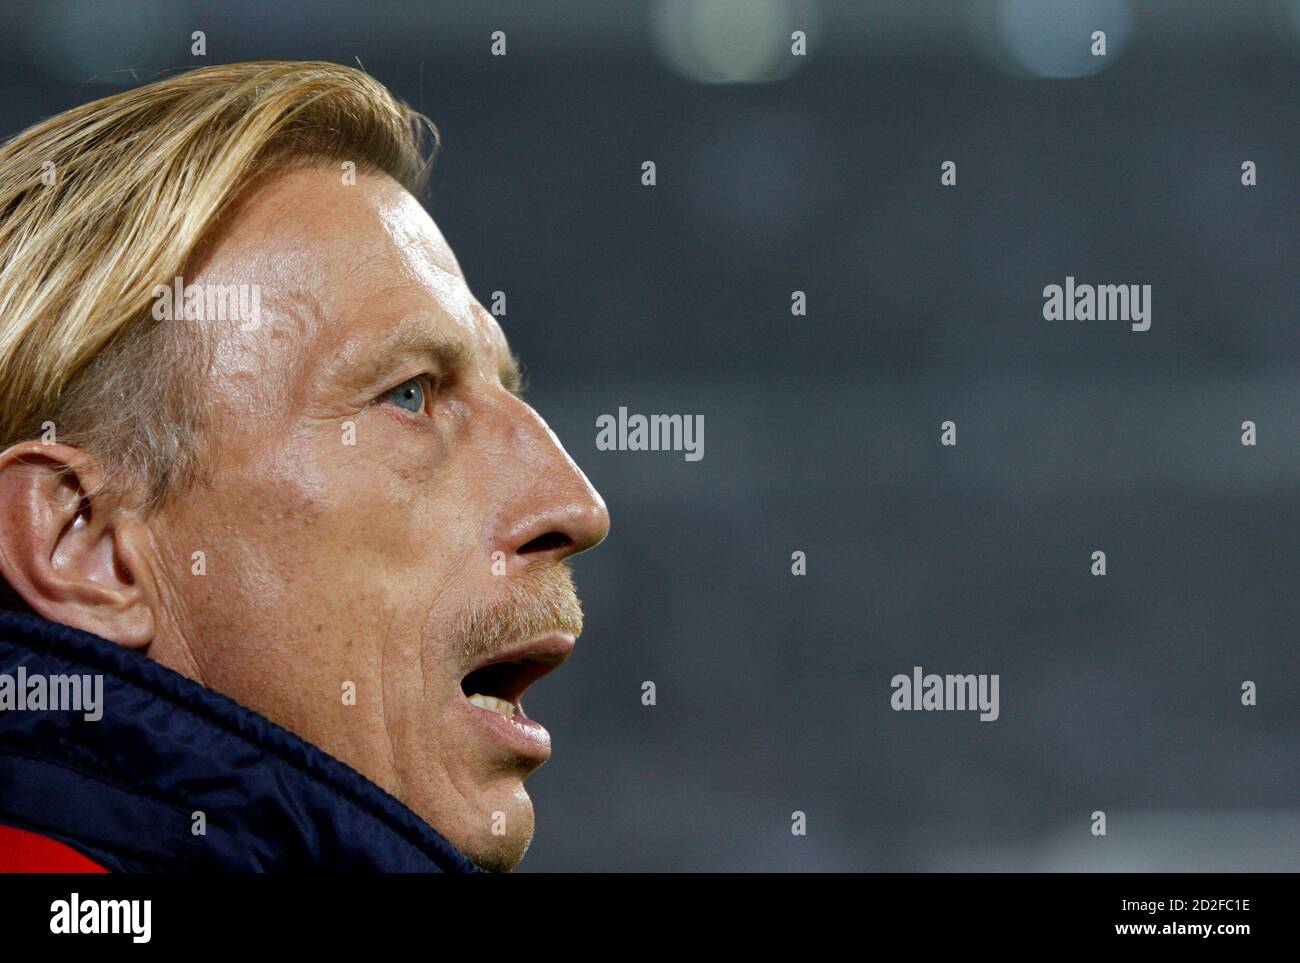 Fenerbahce's coach Christoph Daum of Germany reacts during their Turkey Super League soccer derby match against Besiktas in Istanbul, November 21, 2009. REUTERS/Murad Sezer (TURKEY SPORT SOCCER) Stock Photo